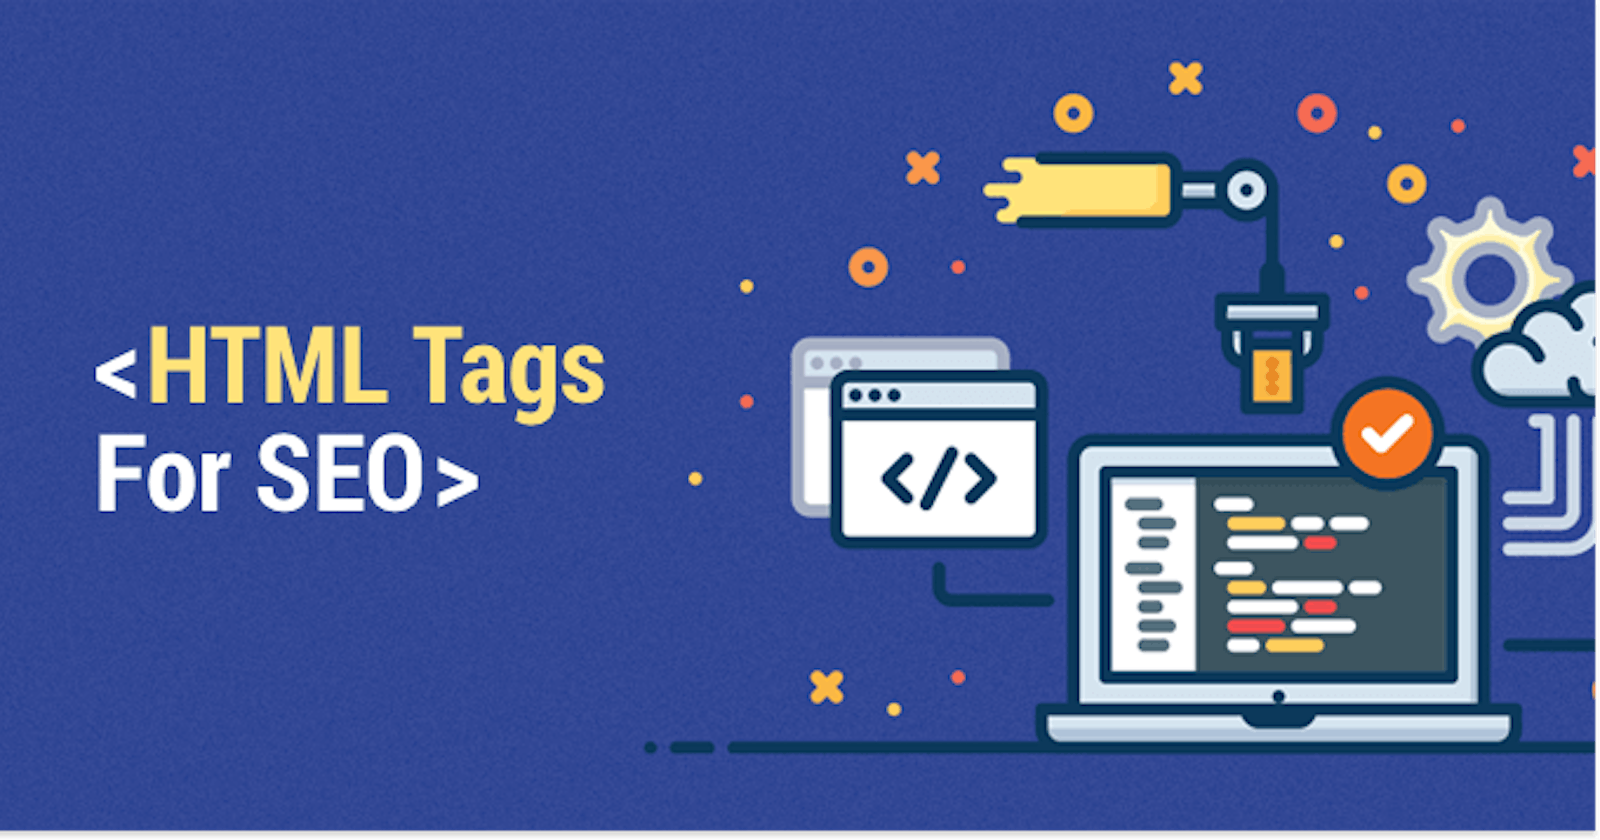 Important HTML tags you need to know for SEO